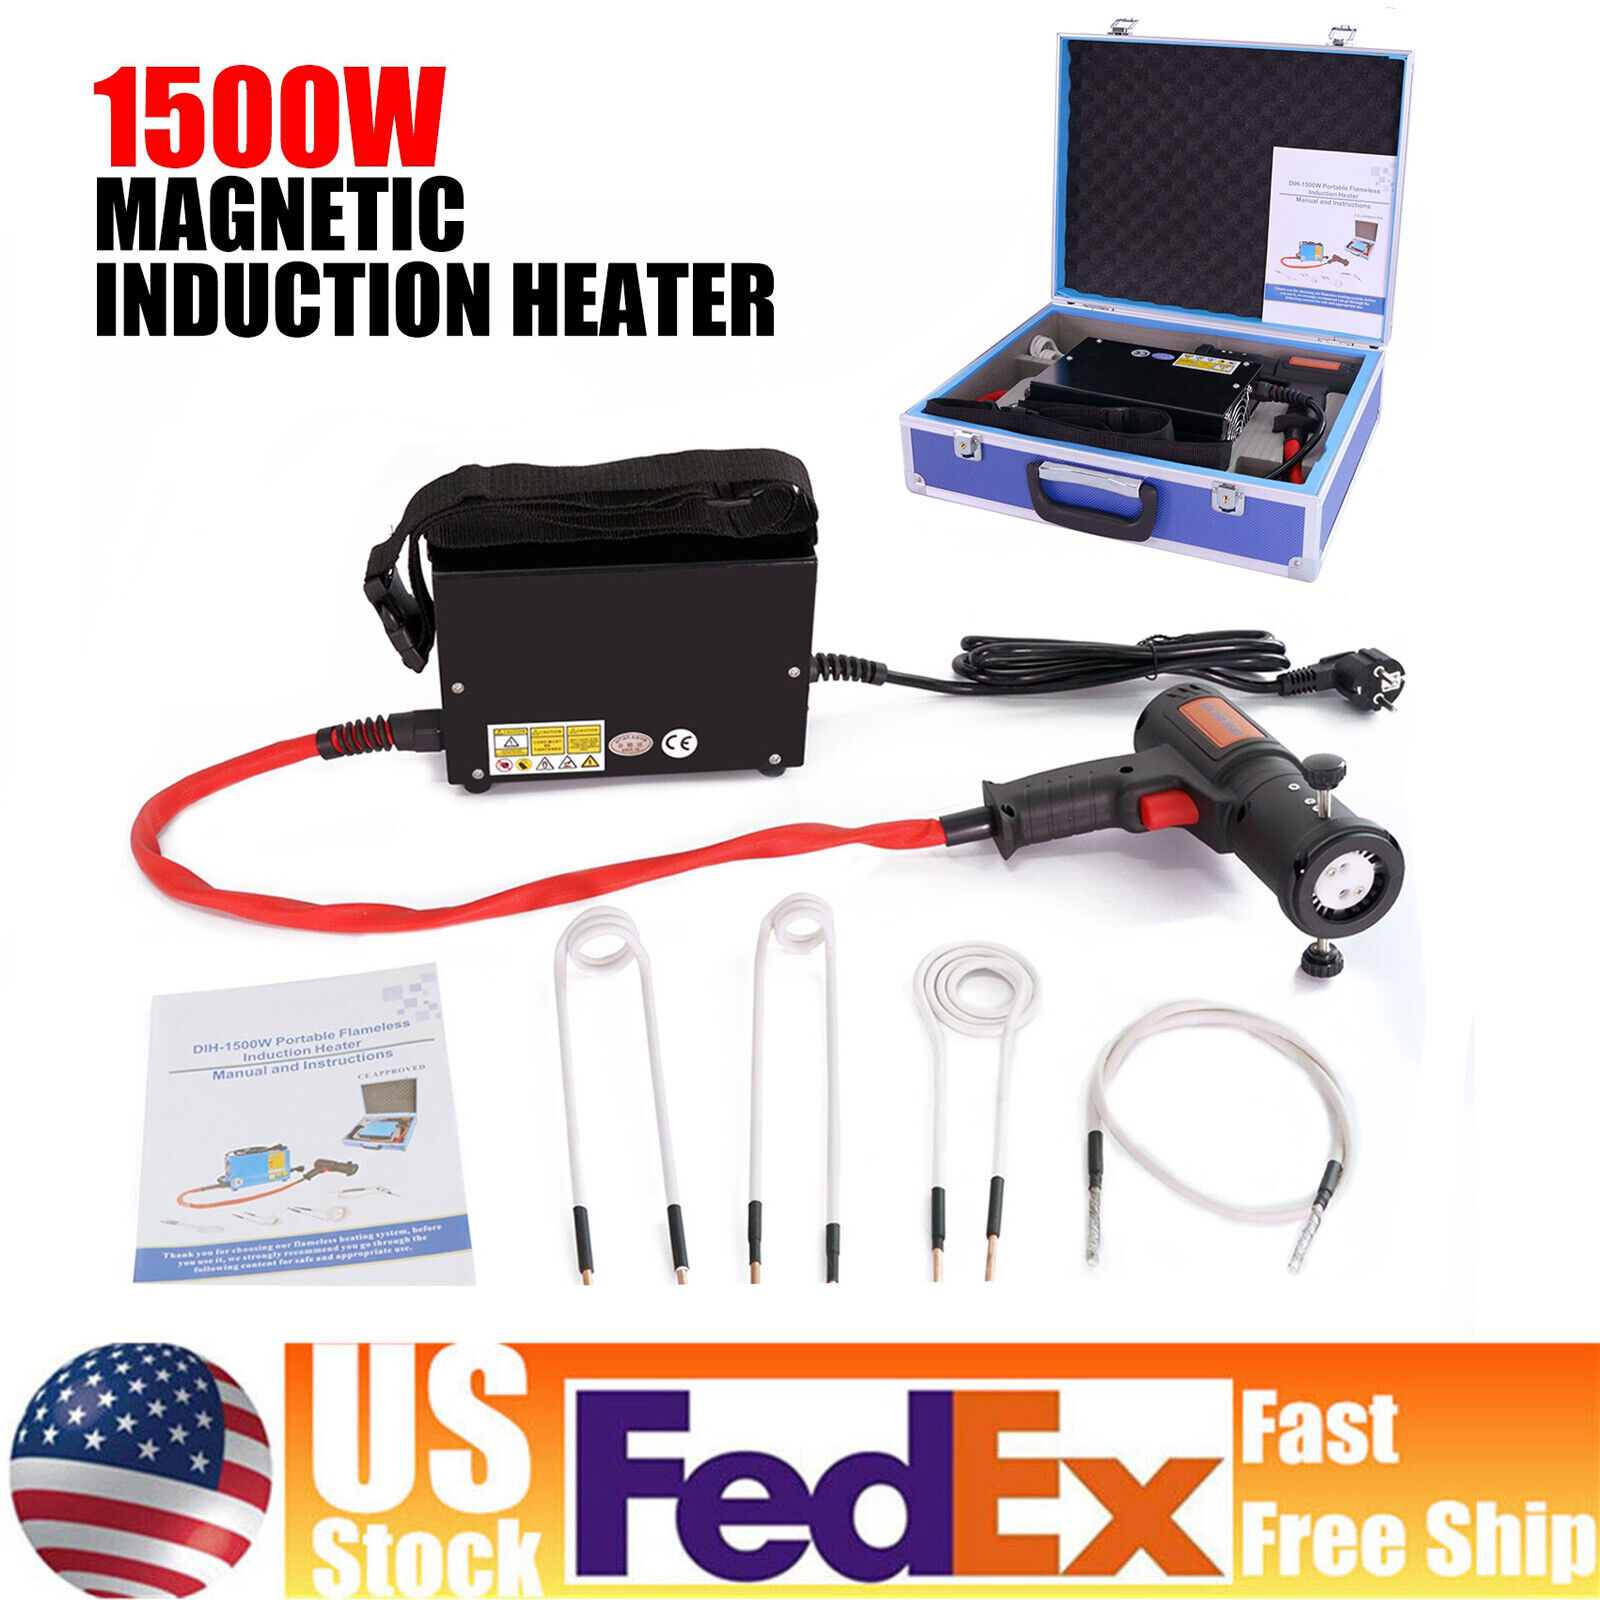 1500W Magnetic Induction Heater Kit Bolt Remover Flameless Heat Tool+4 Soft Coil